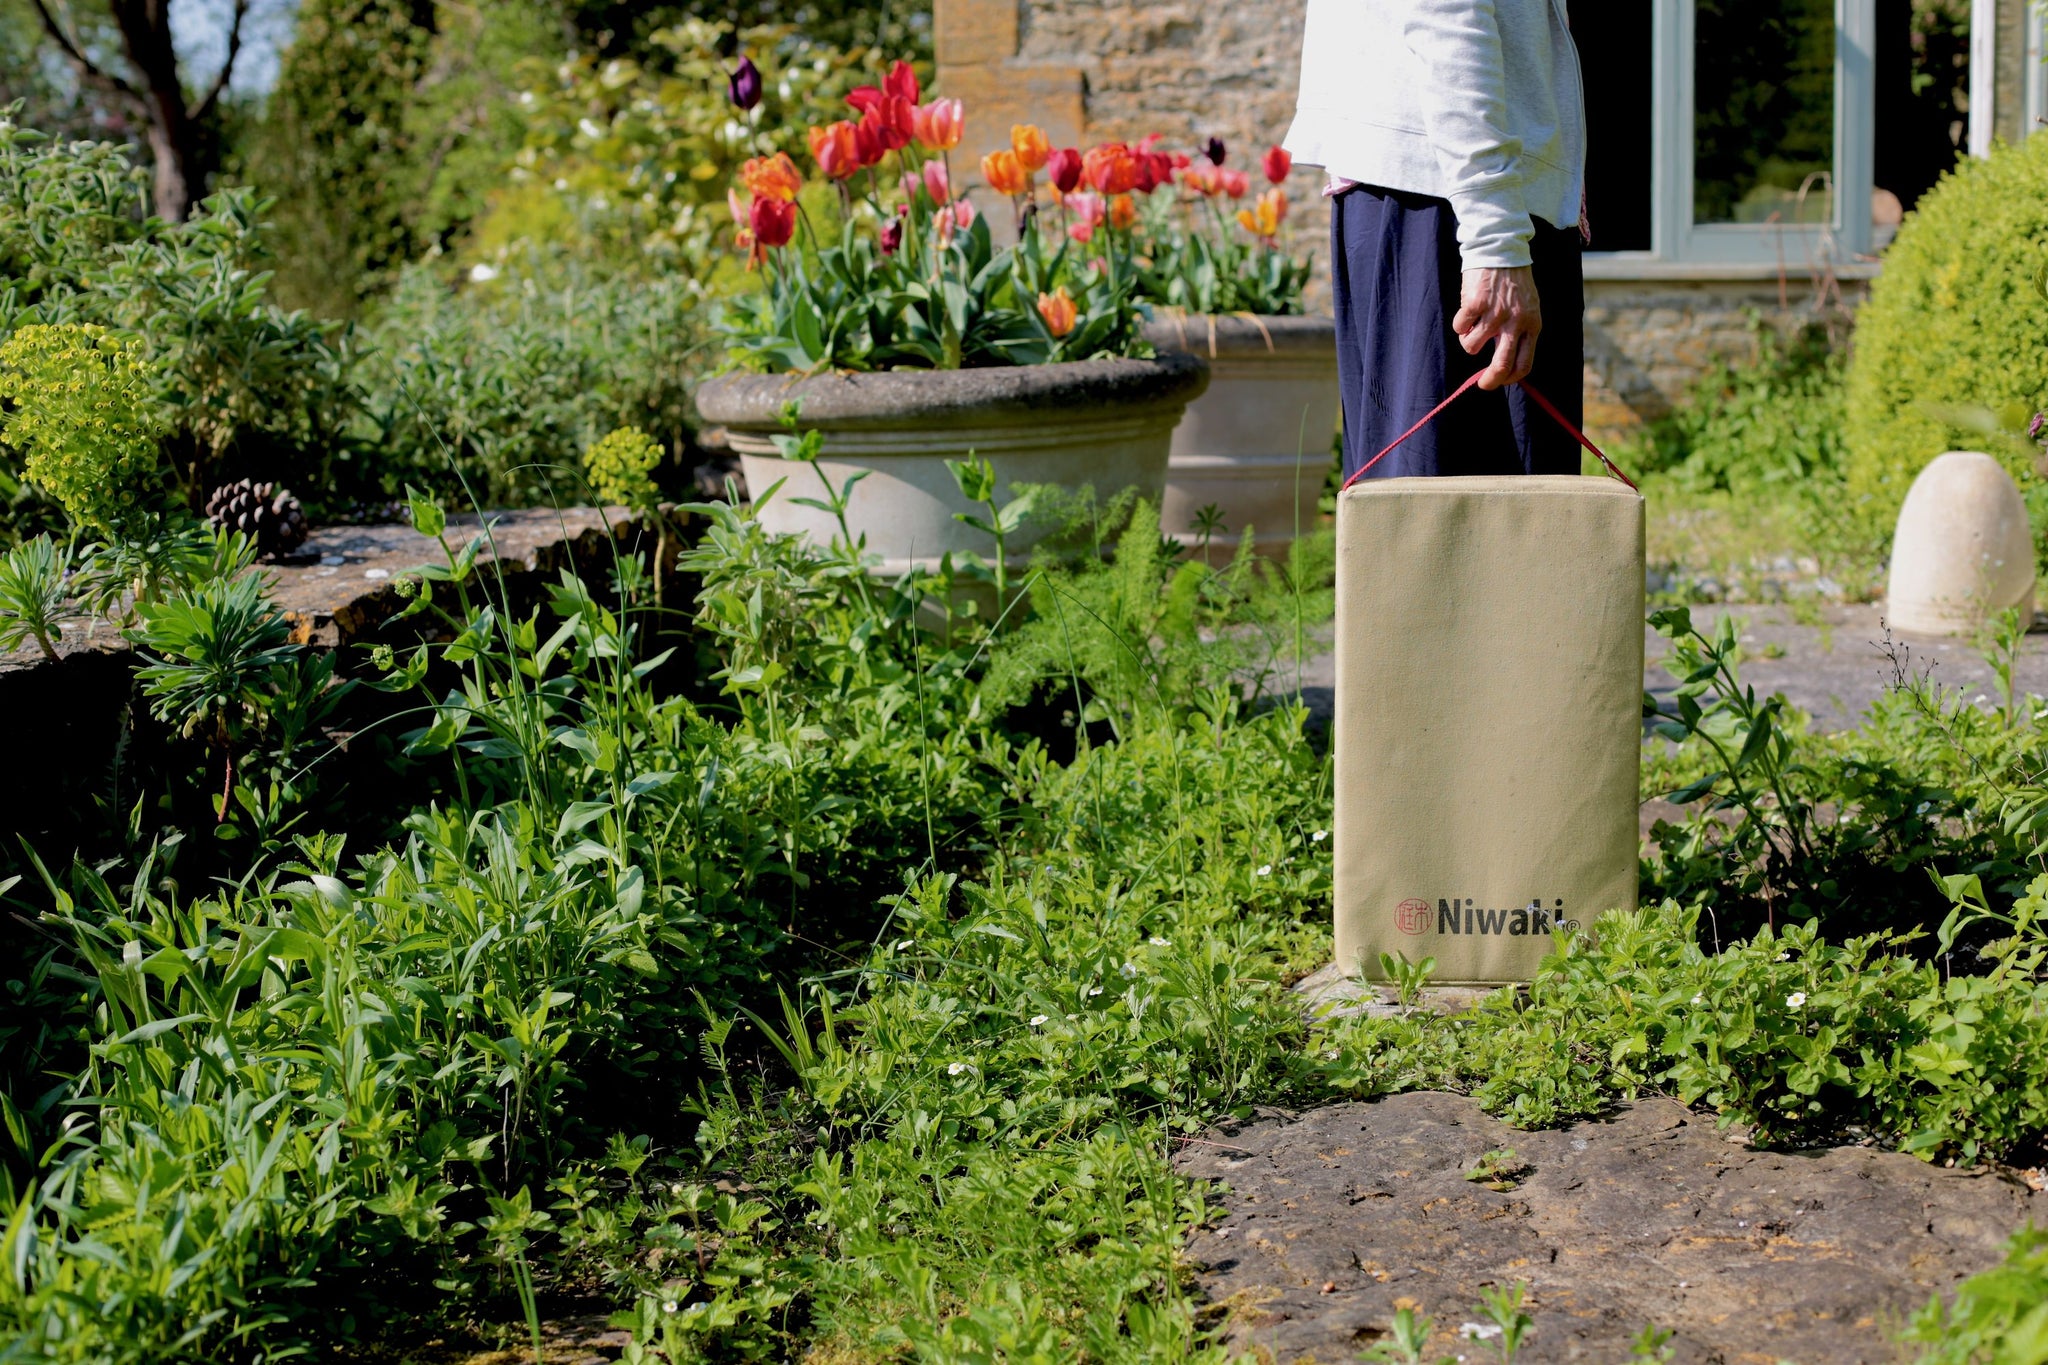 Heavy-duty, protective garden kneeler for cushioning and protecting knees and legs when working in the garden, by masterful Japanese Garden brand Niwaki, featuring water-resistant tan canvas.